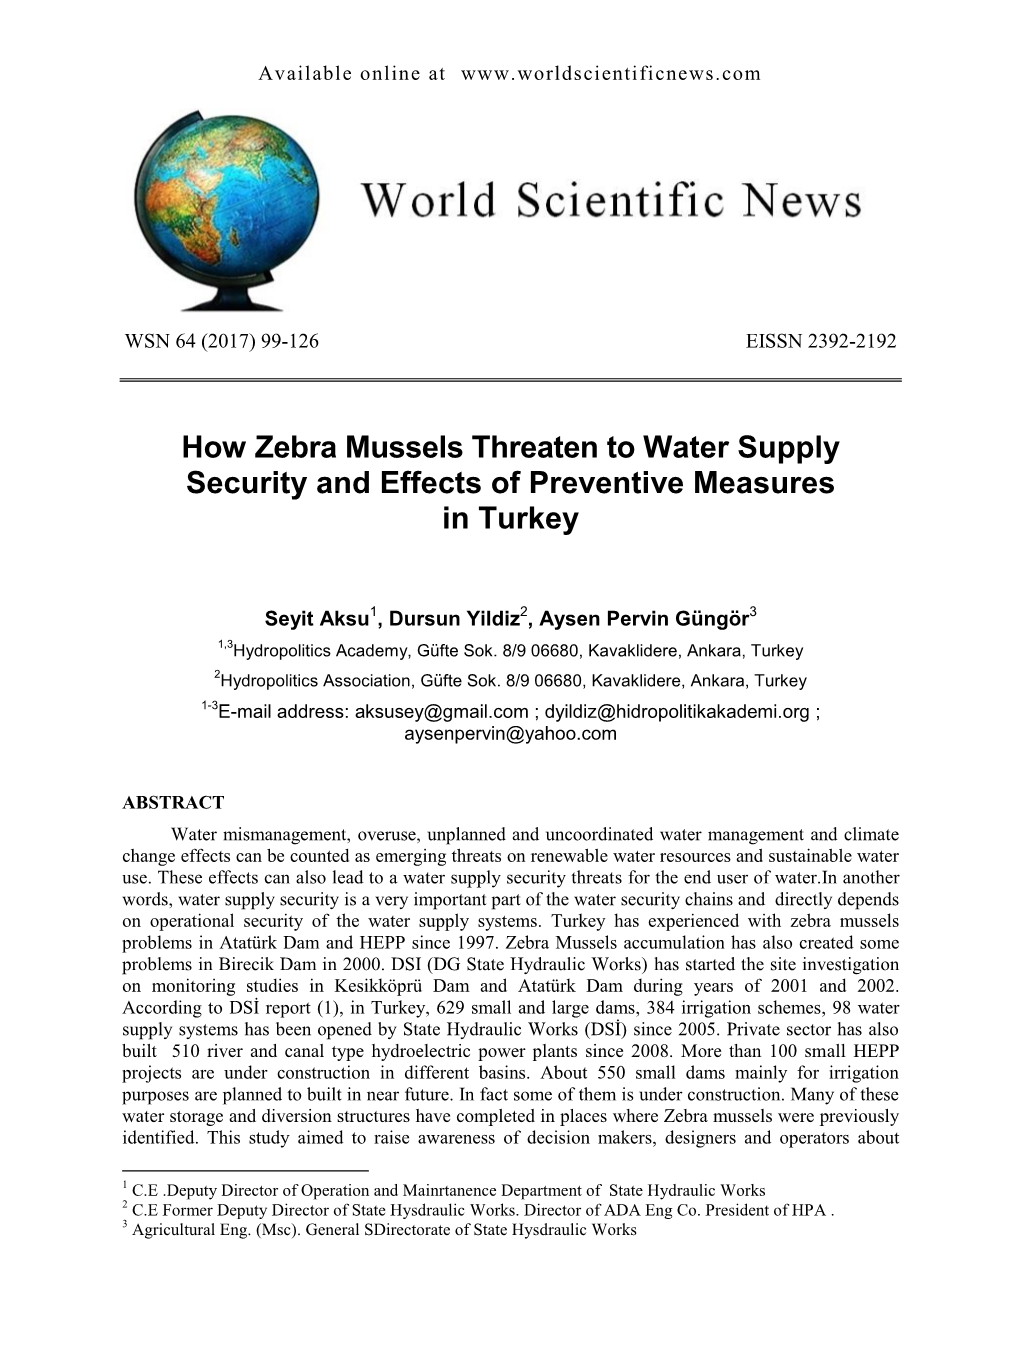 How Zebra Mussels Threaten to Water Supply Security and Effects of Preventive Measures in Turkey